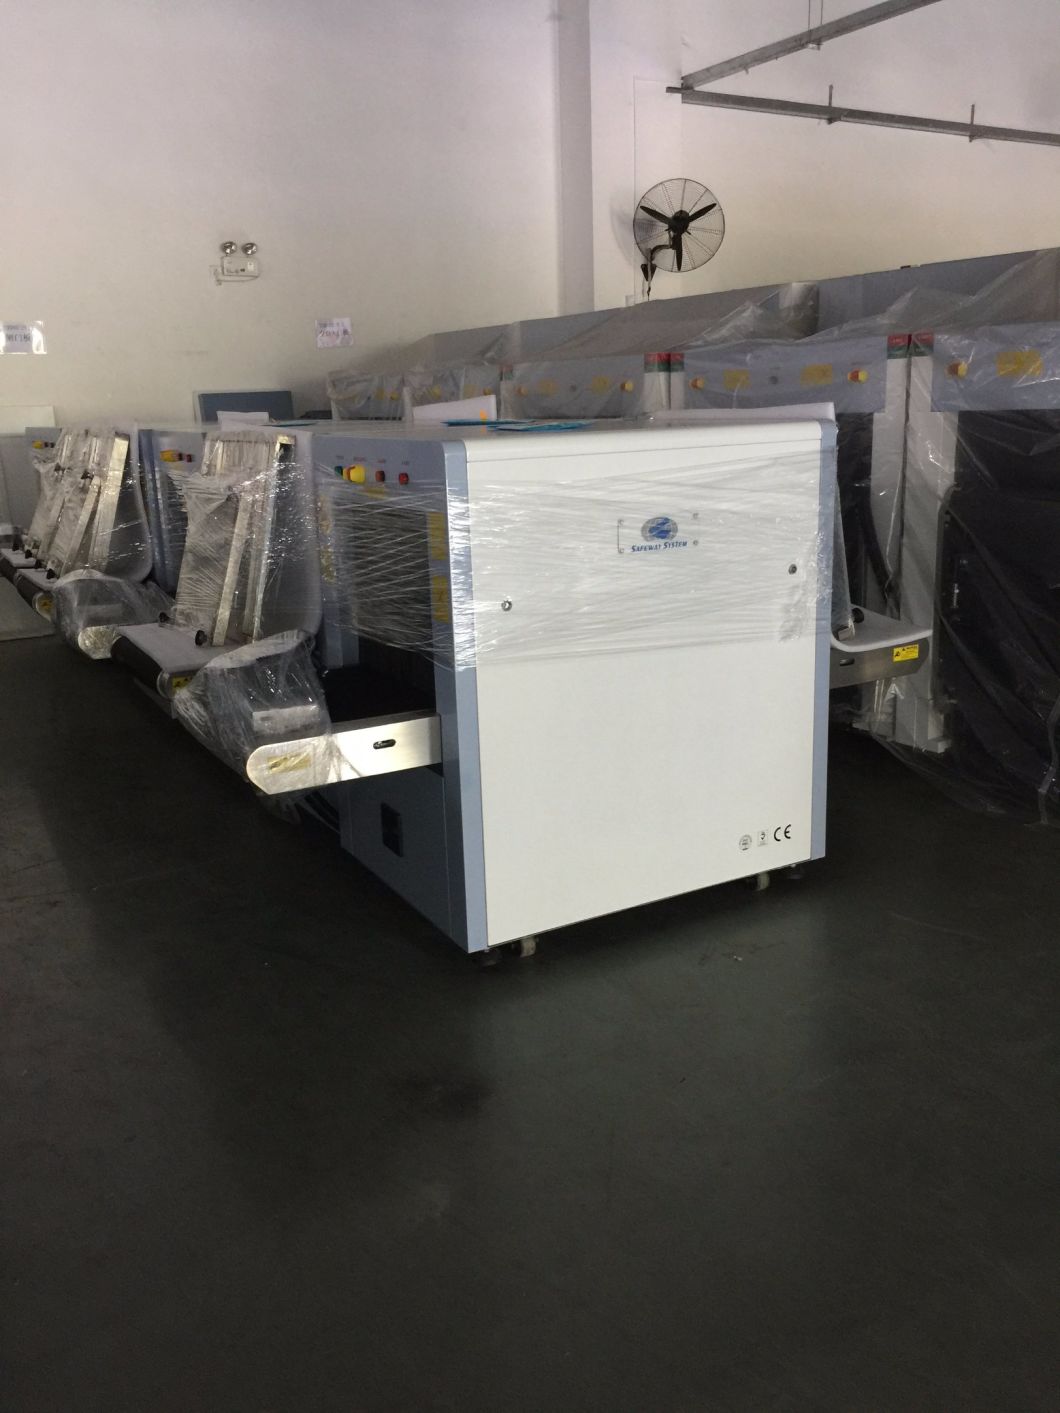 At6550 Middle Size X-ray Baggage and Parcel Security Inspection Scanning System - High Quality with UK Detector